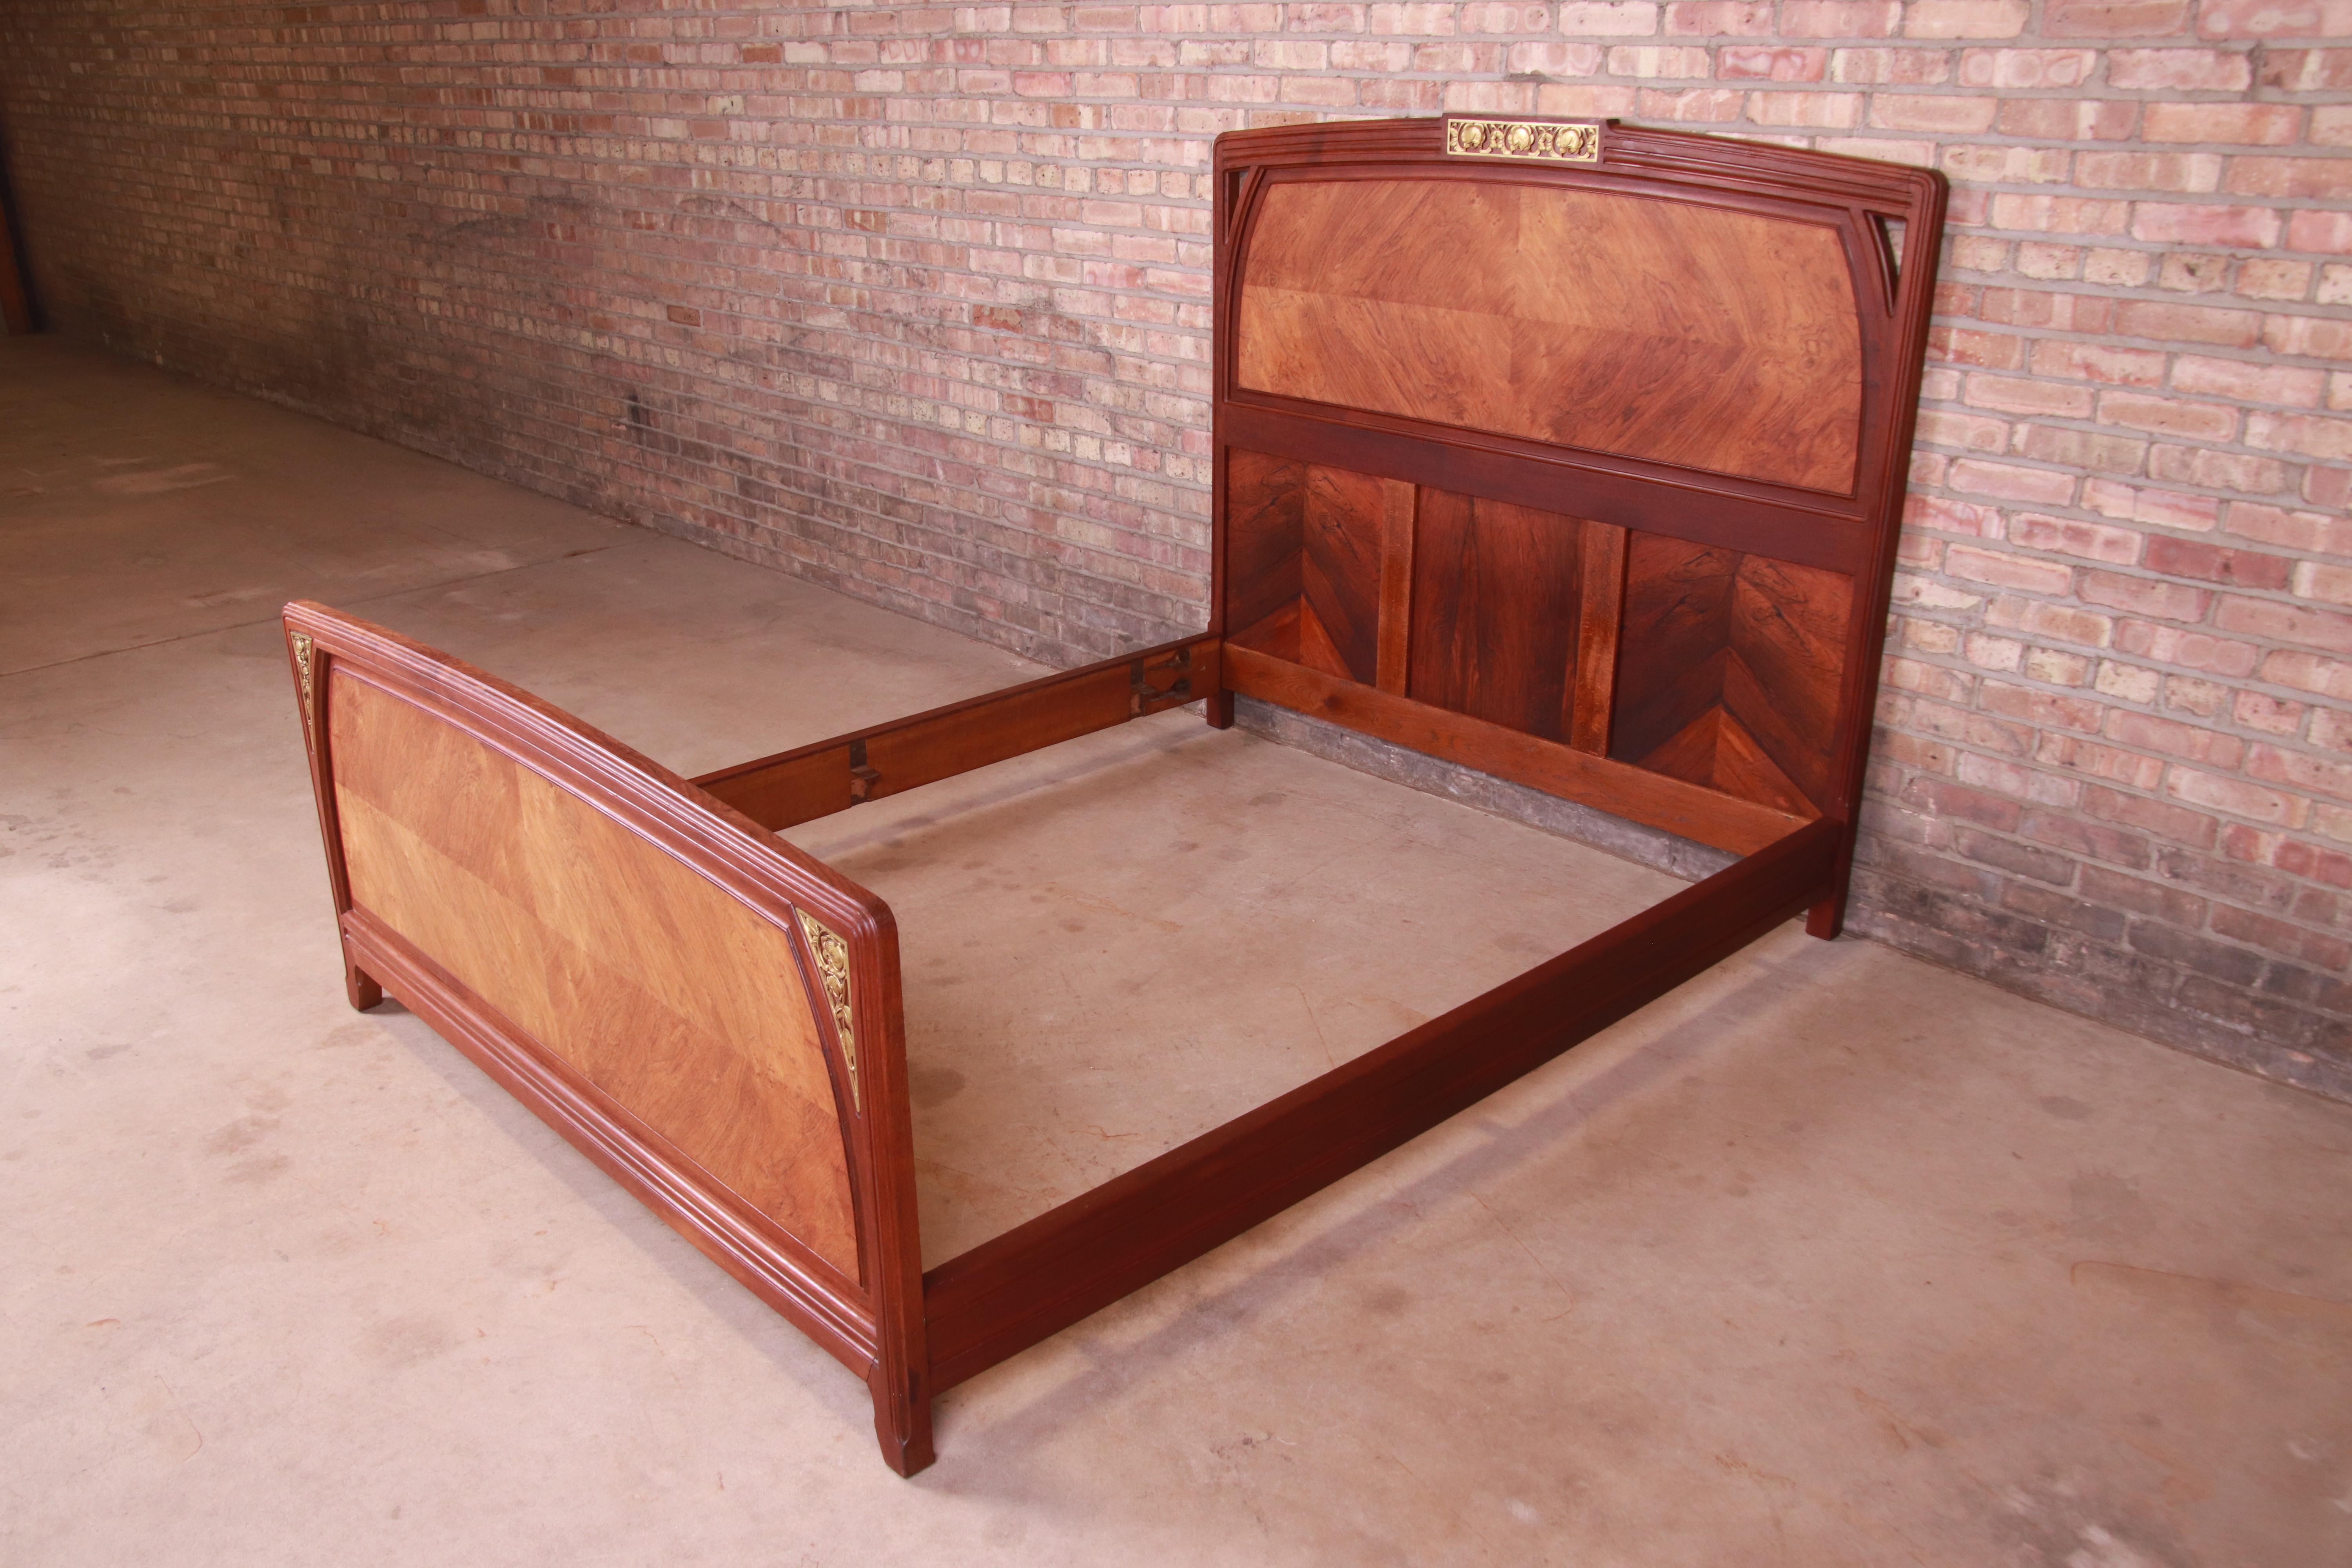 A gorgeous antique French Art Nouveau queen size bed frame

In the manner of Louis Majorelle

France, Circa 1900

Book-matched rosewood, with mounted bronze floral accents.

Measures: 63